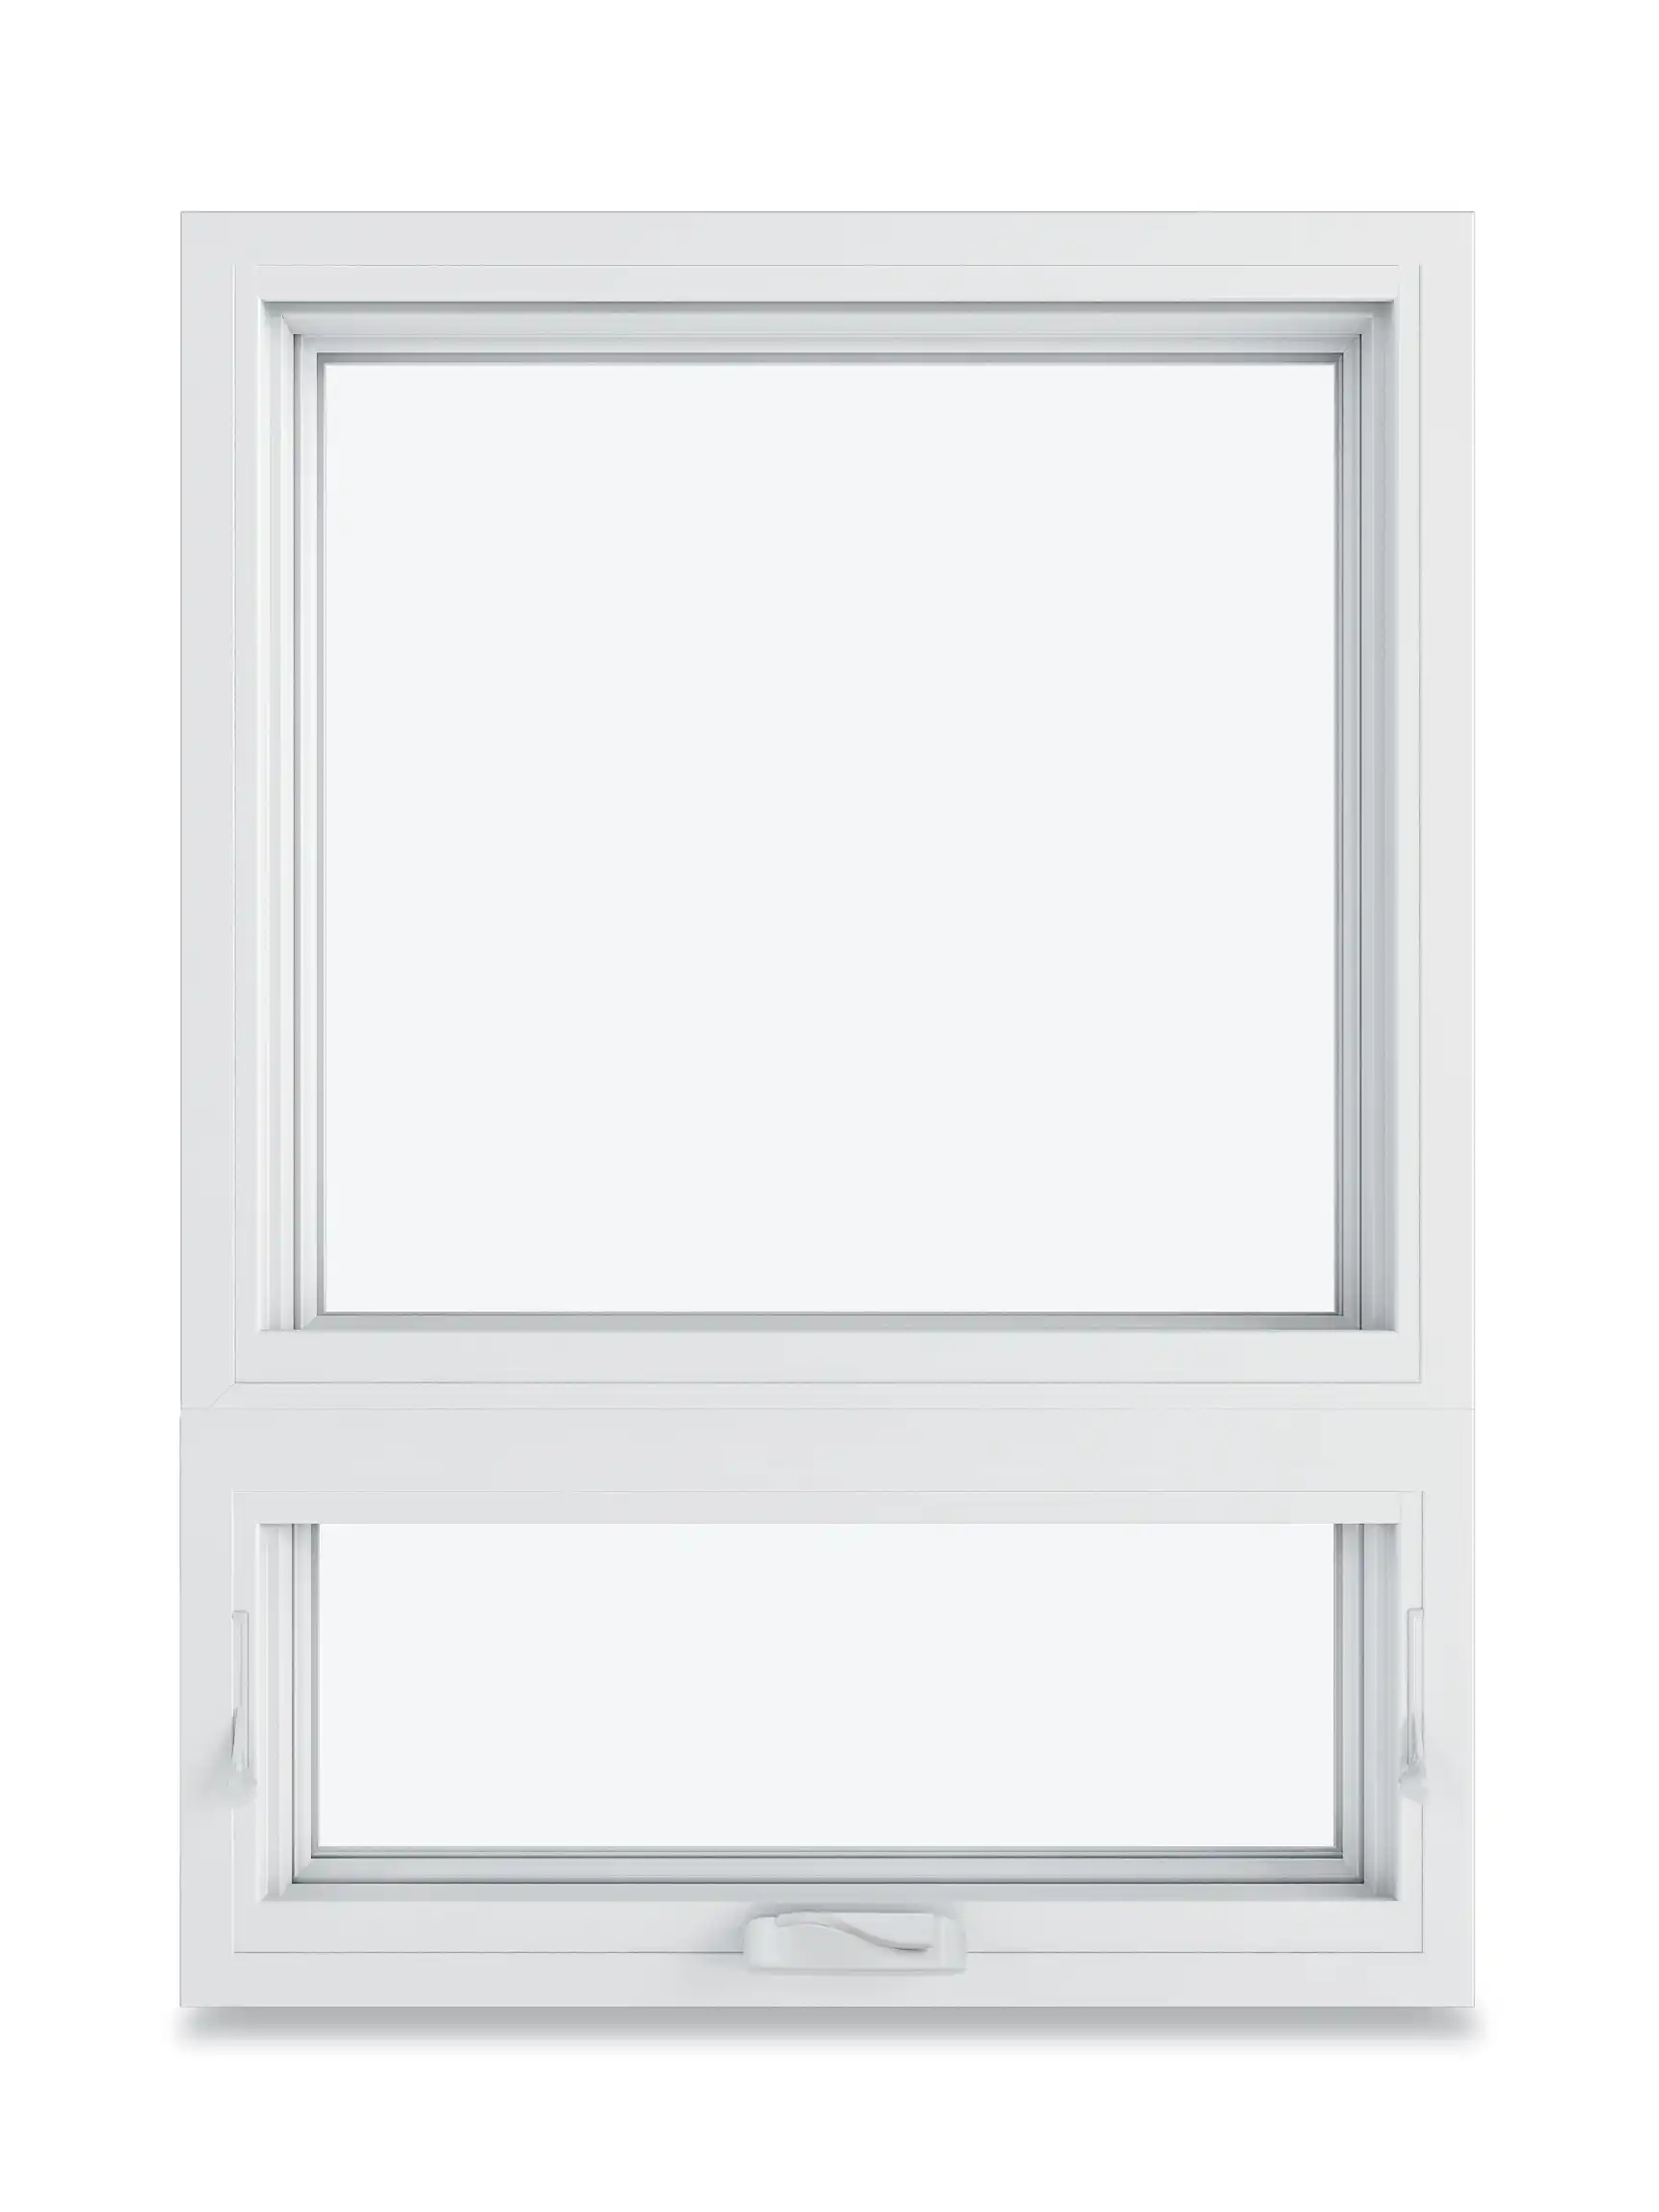 https://a.storyblok.com/f/127606/1728x2304/99b0f7abee/marvin-replacement-awning-window-below-picture-window.webp